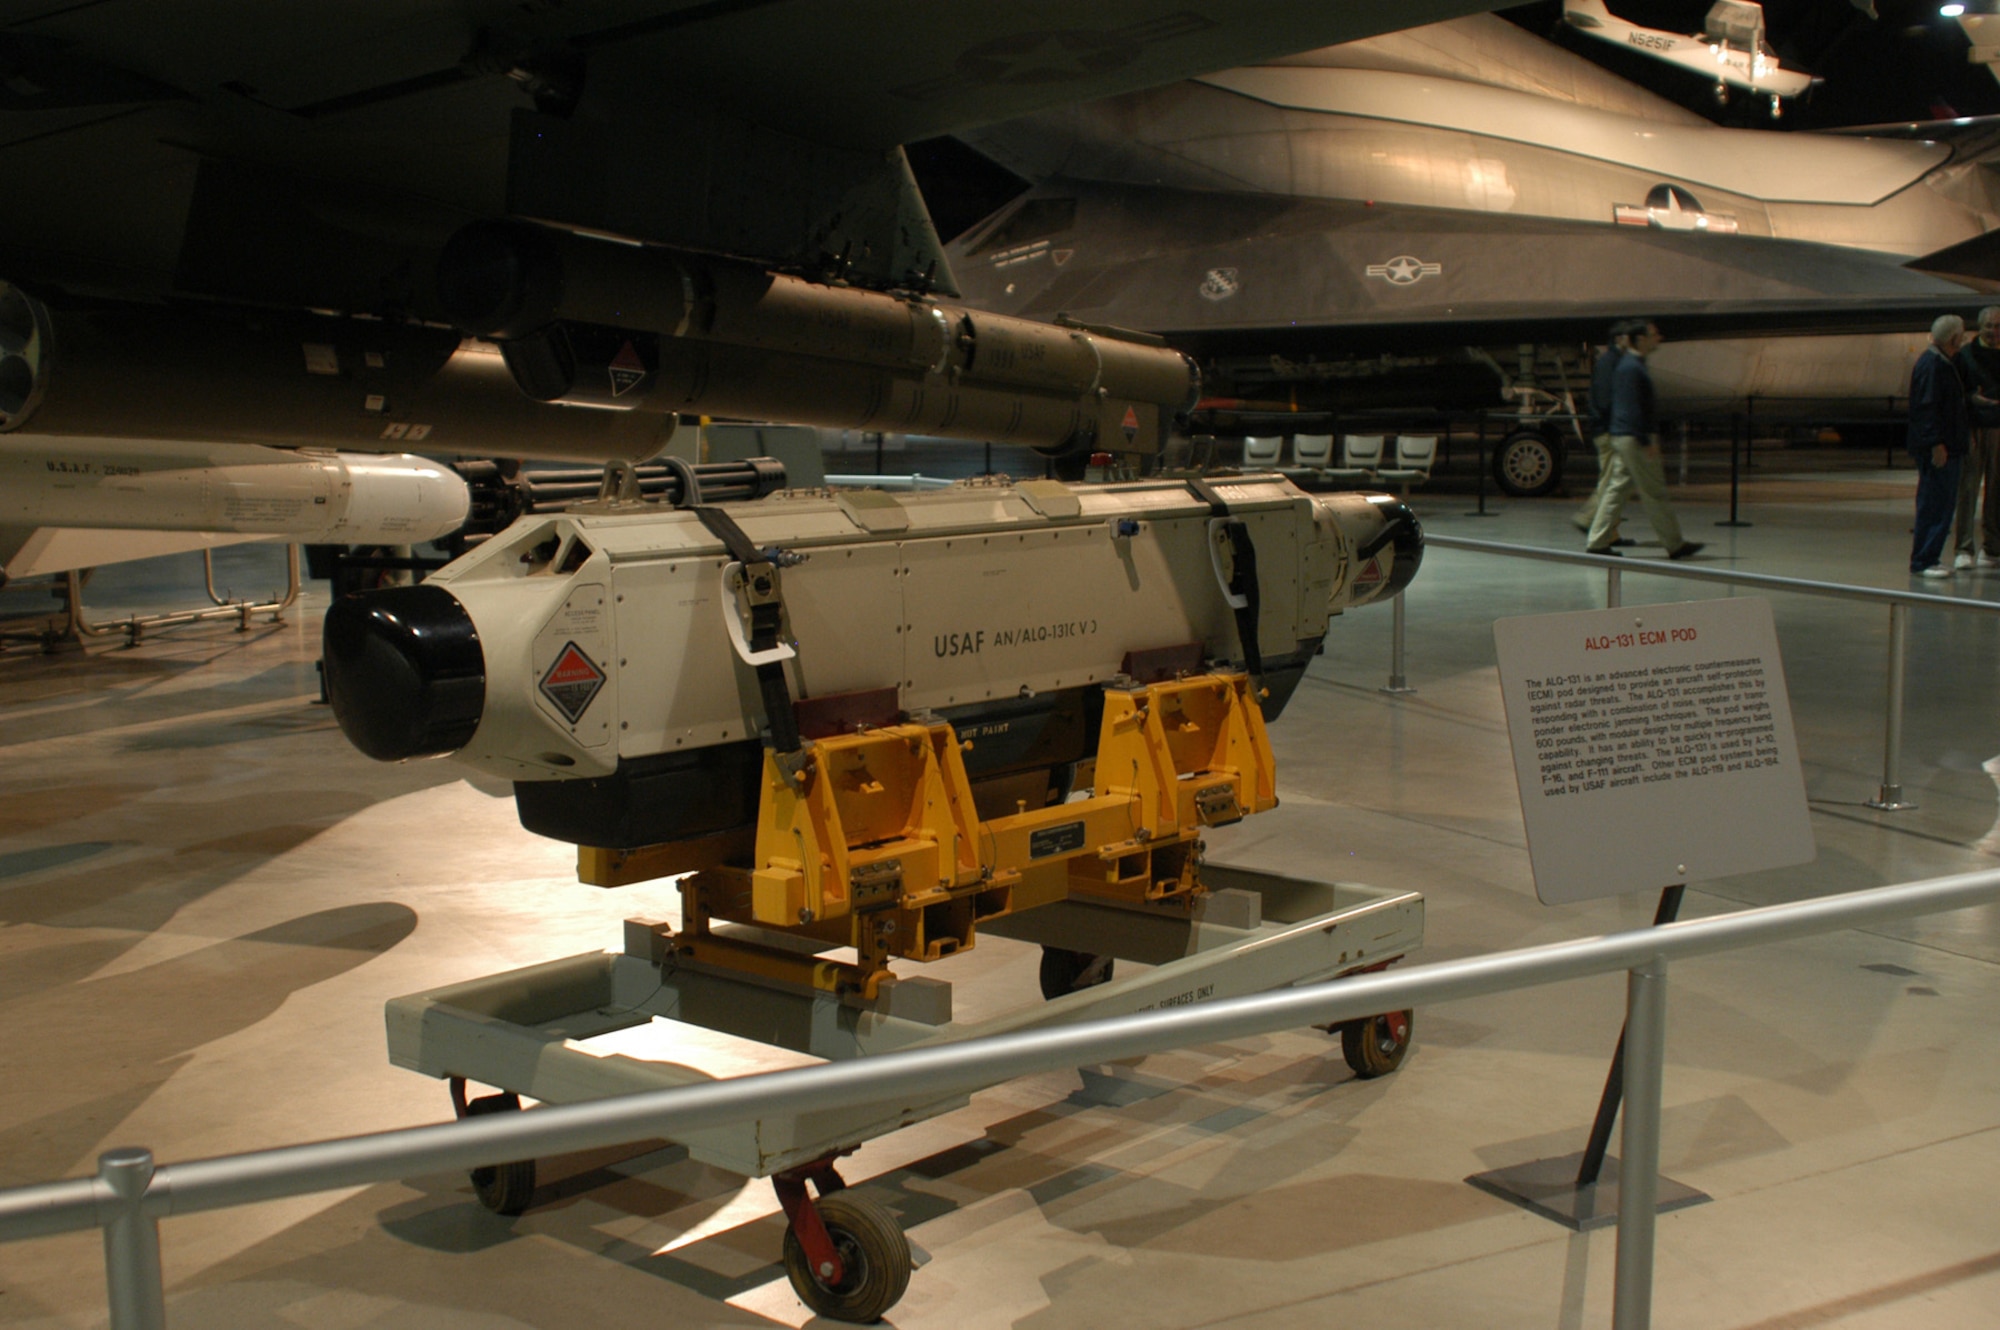 DAYTON, Ohio - ALQ-131 ECM Pod on display at the National Museum of the U.S. Air Force. (U.S. Air Force photo)